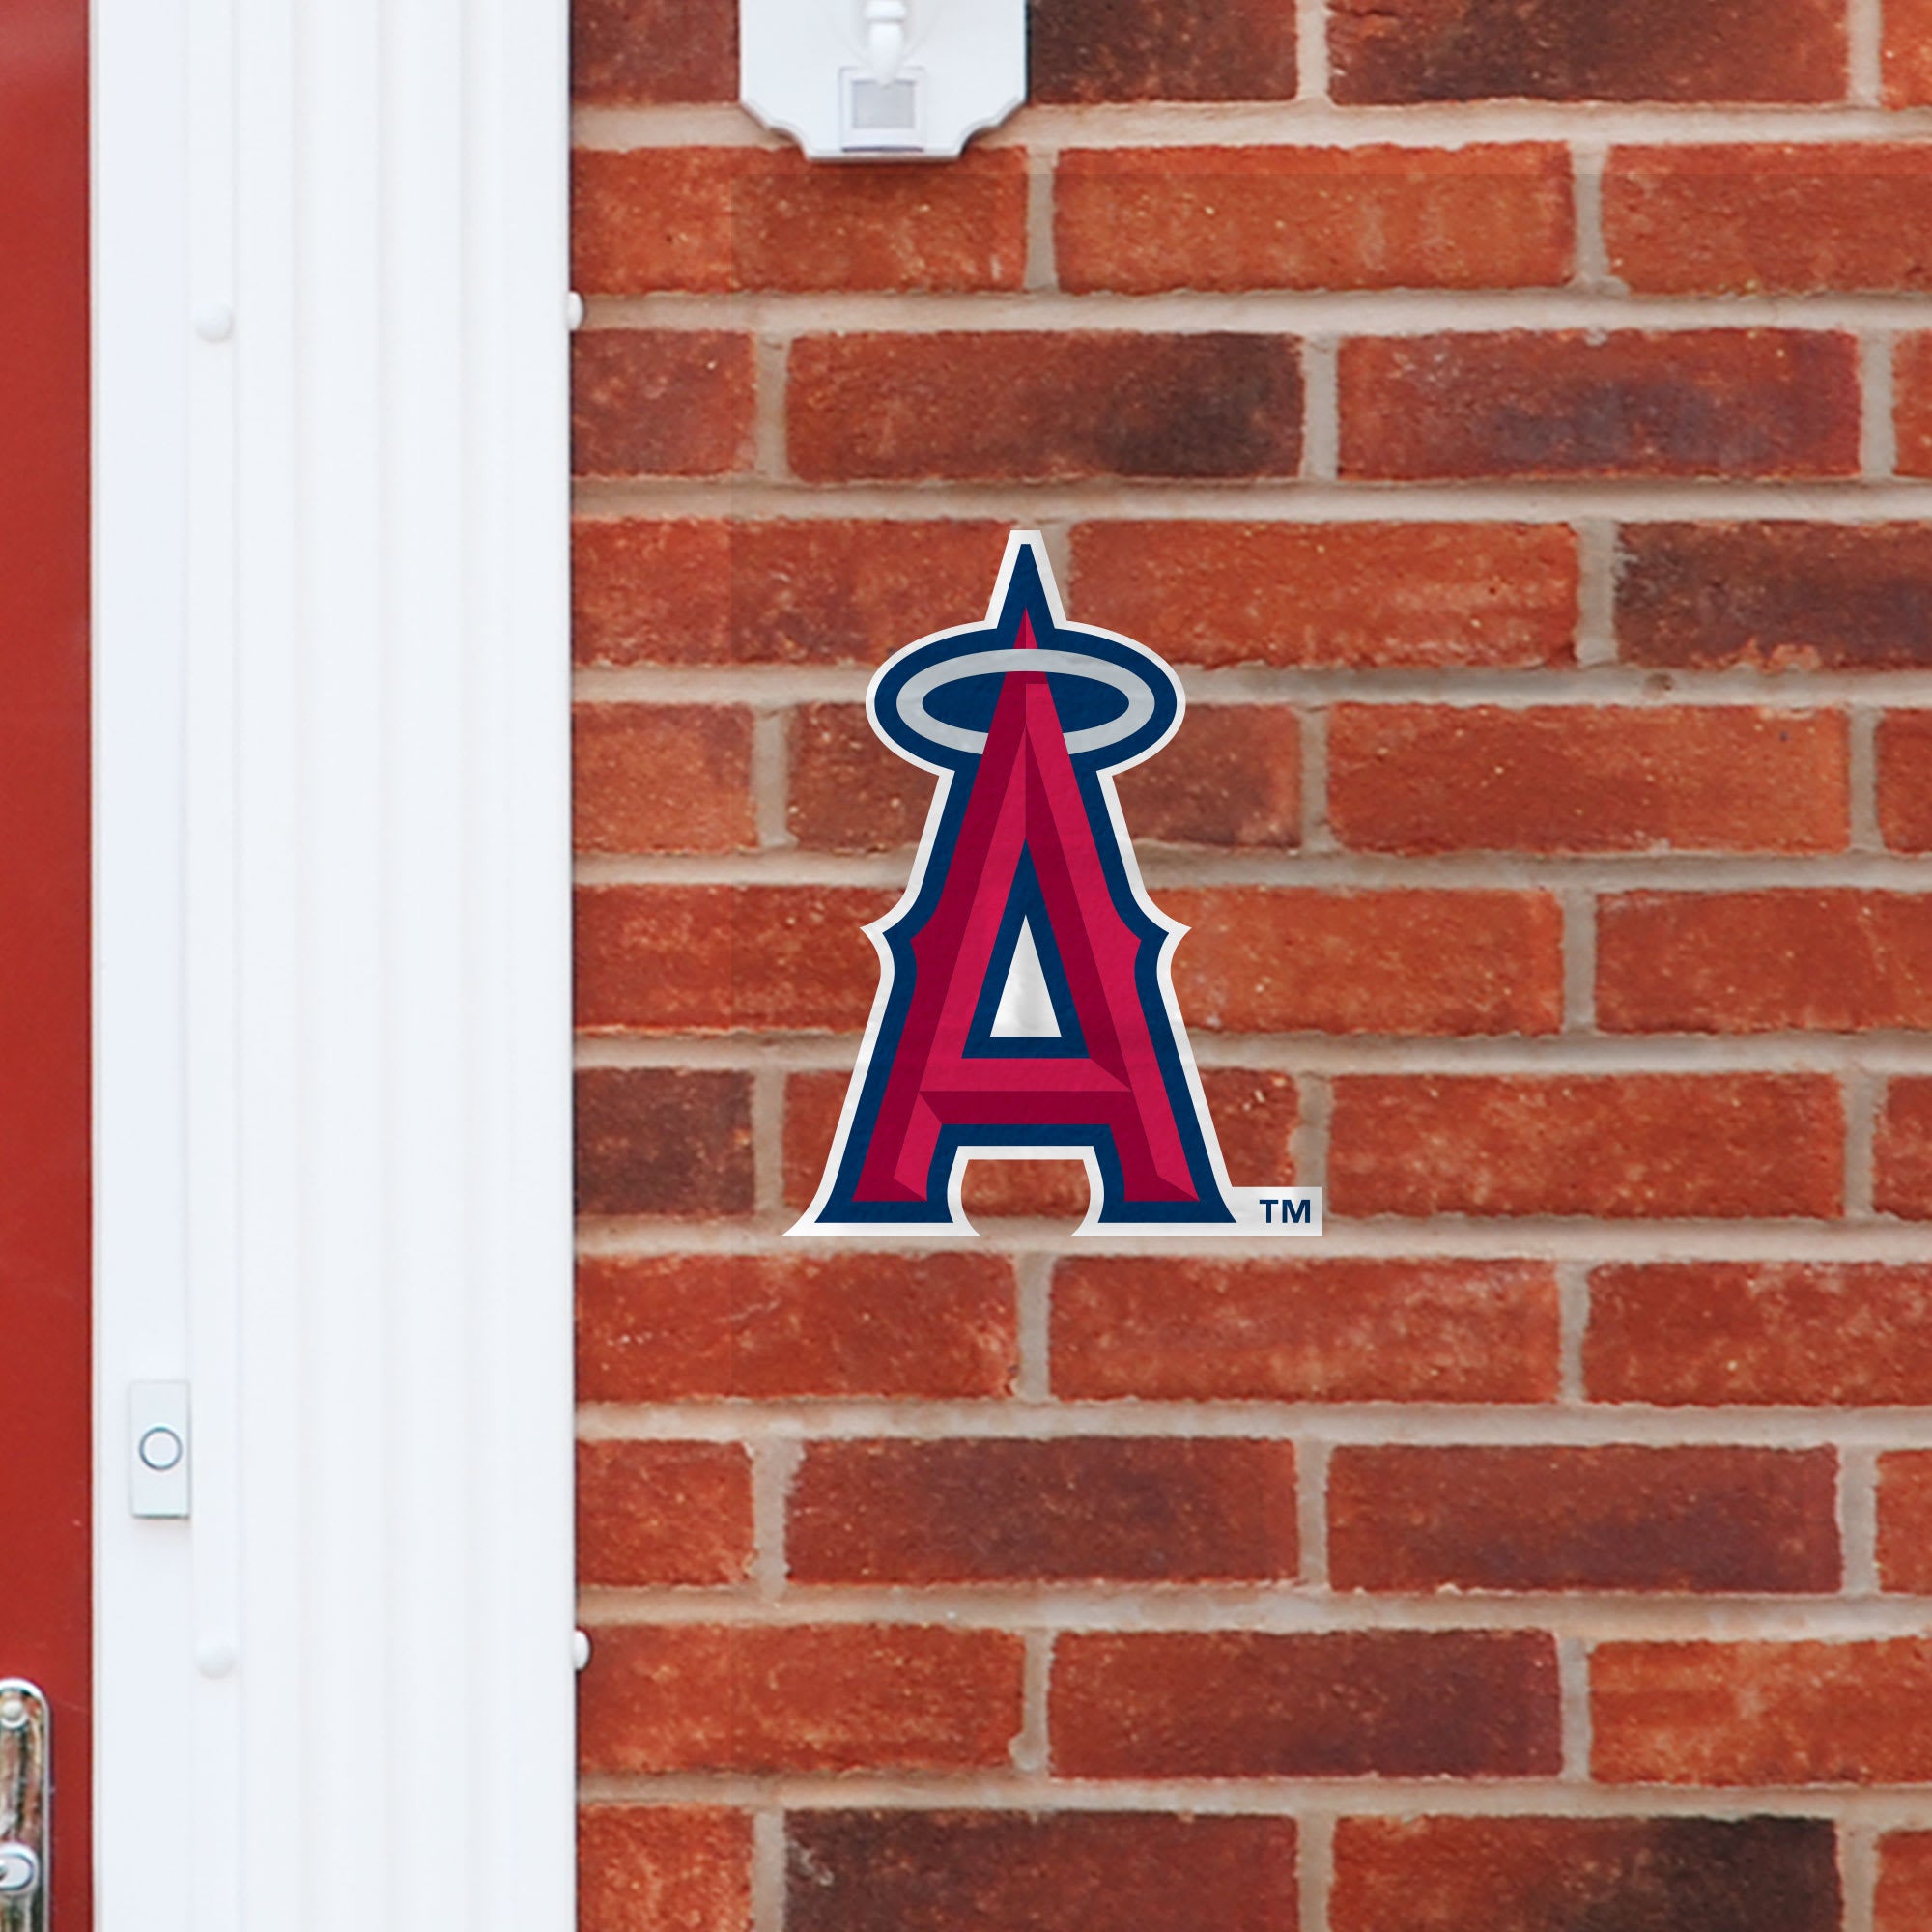 LA Angels: Logo - Officially Licensed MLB Outdoor Graphic Large by Fathead | Wood/Aluminum